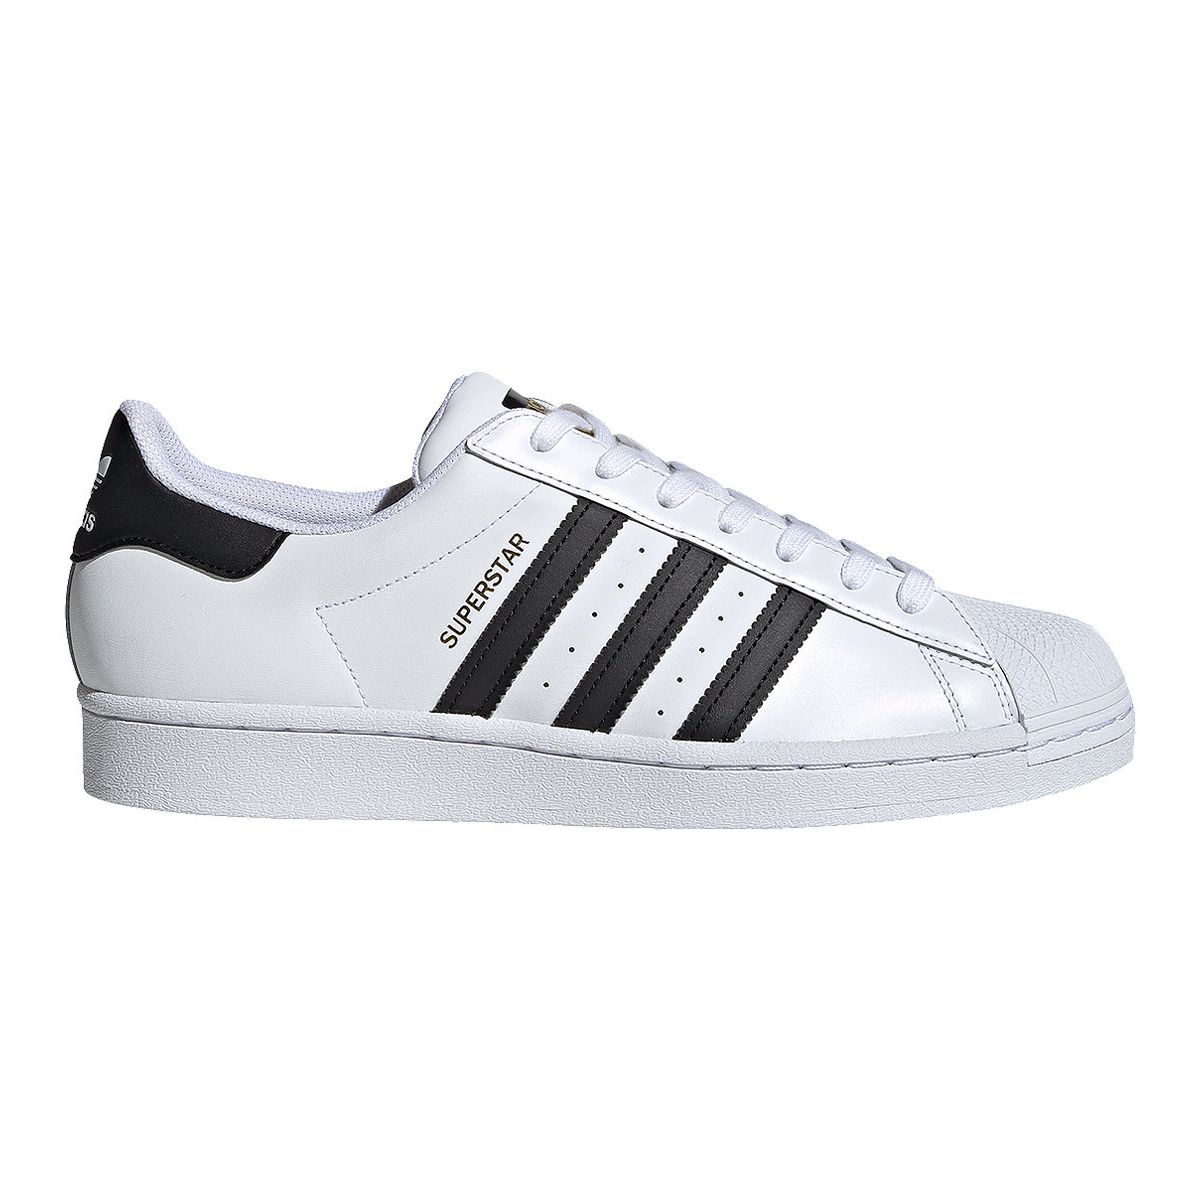 adidas Men's Superstar Shoes  Sneakers Low Top Leather